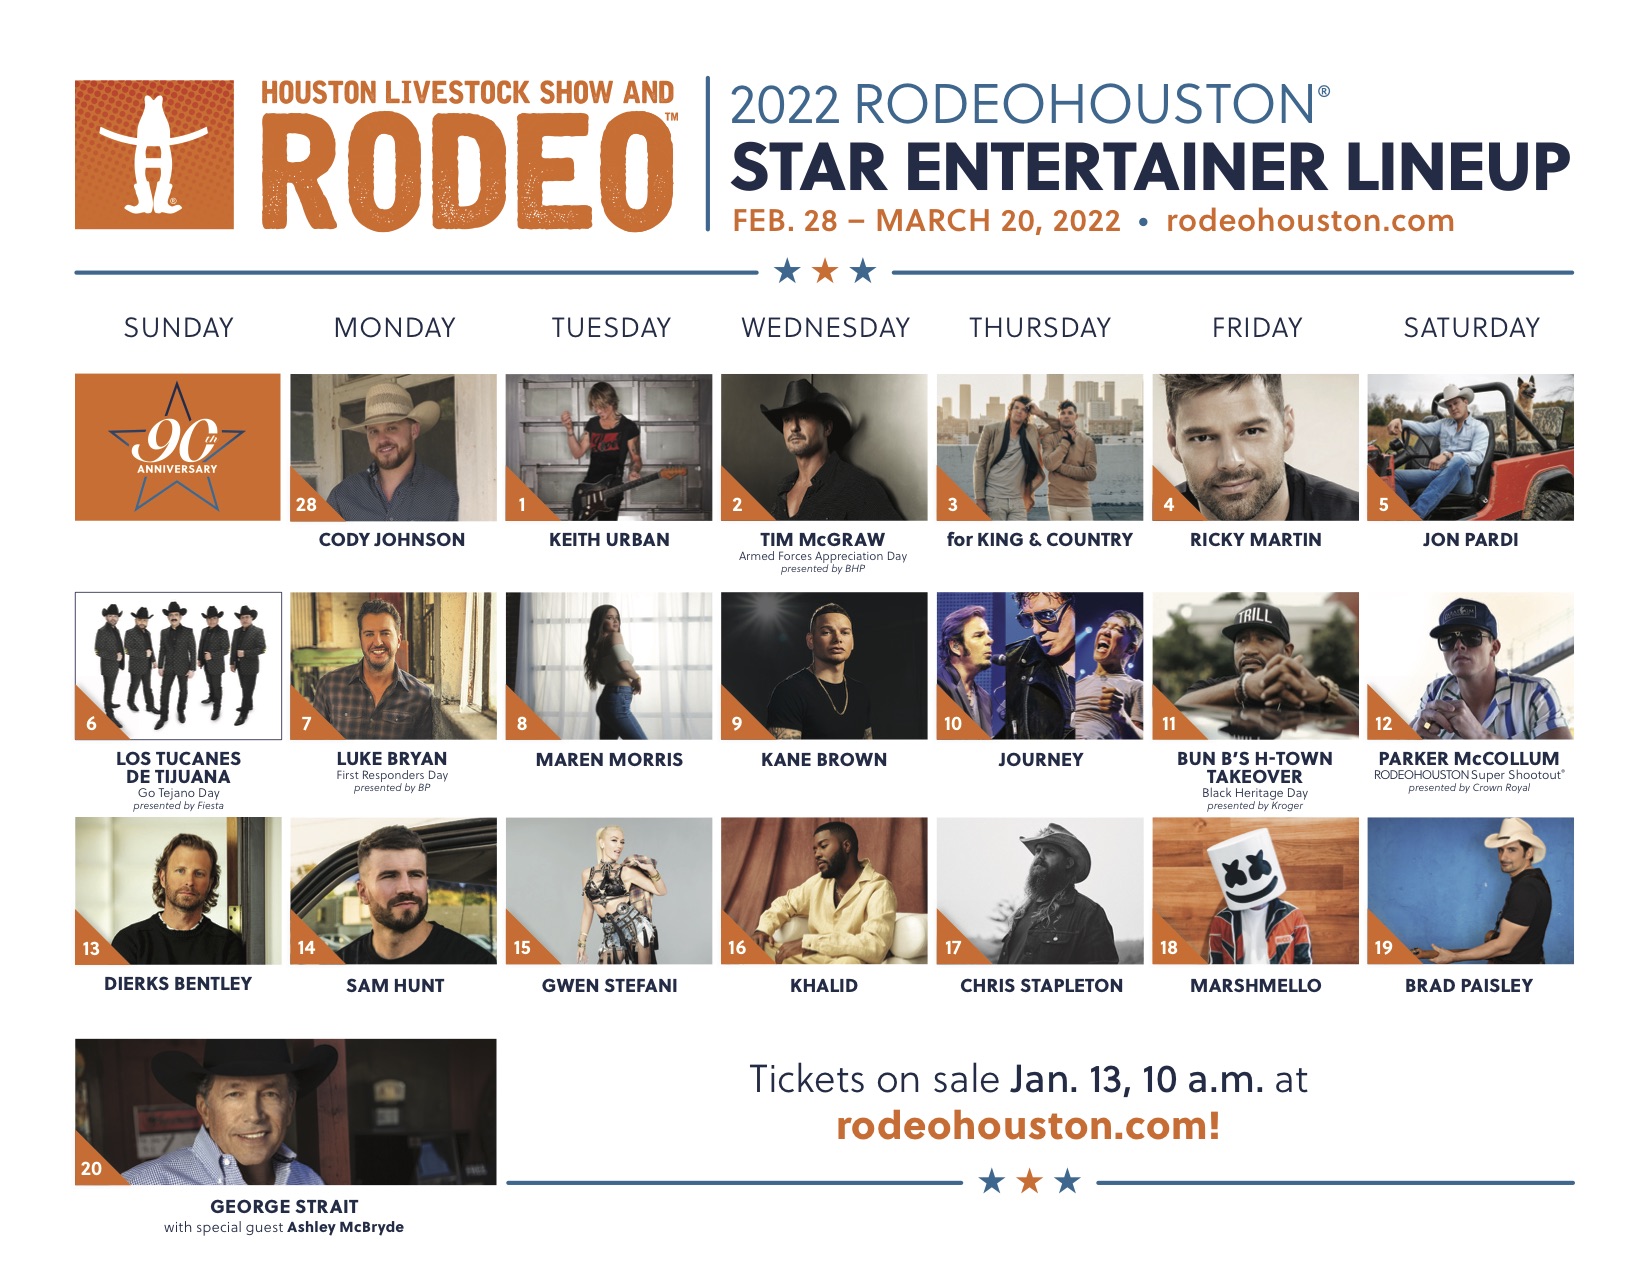 Houston Livestock Show and Rodeo Announces 2022 Concert Lineup